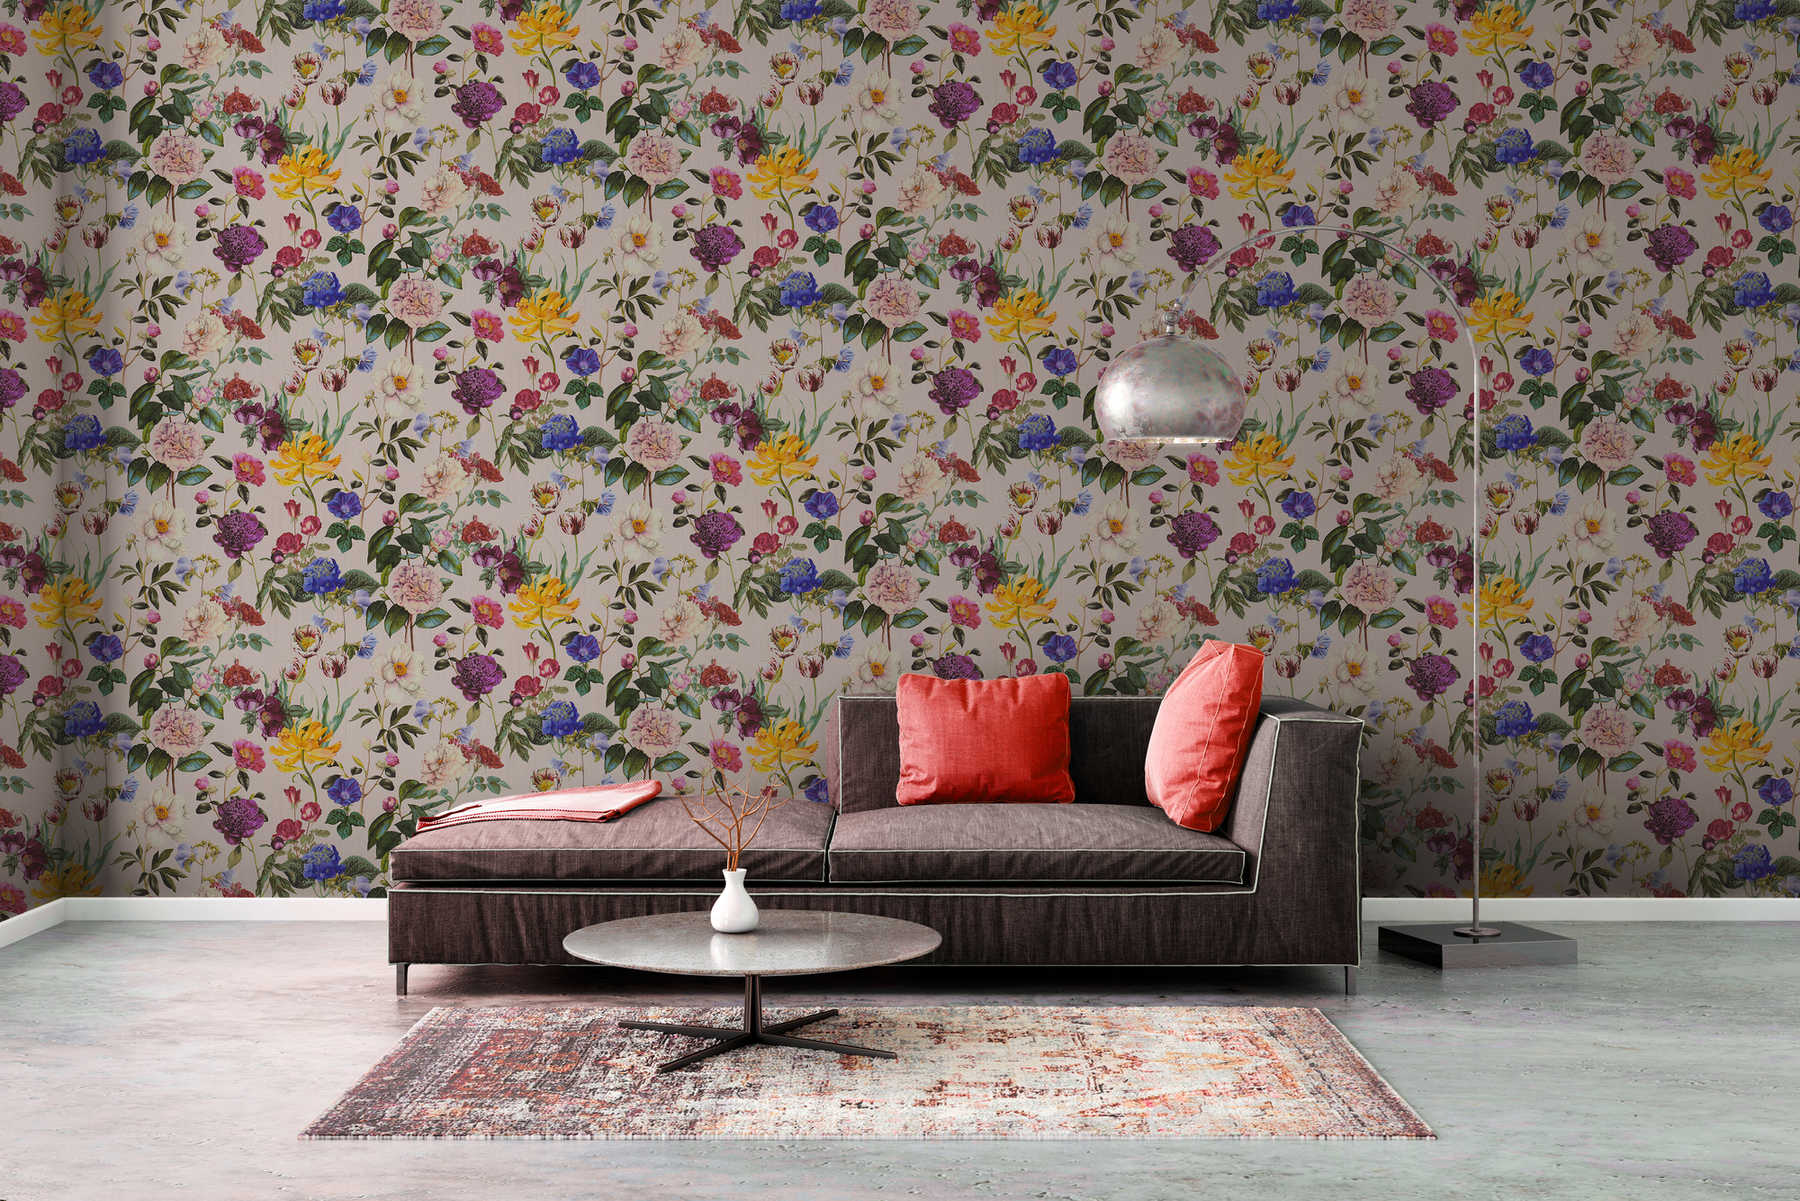             Floral wallpaper with flowers in bright colours - colourful, green, pink
        